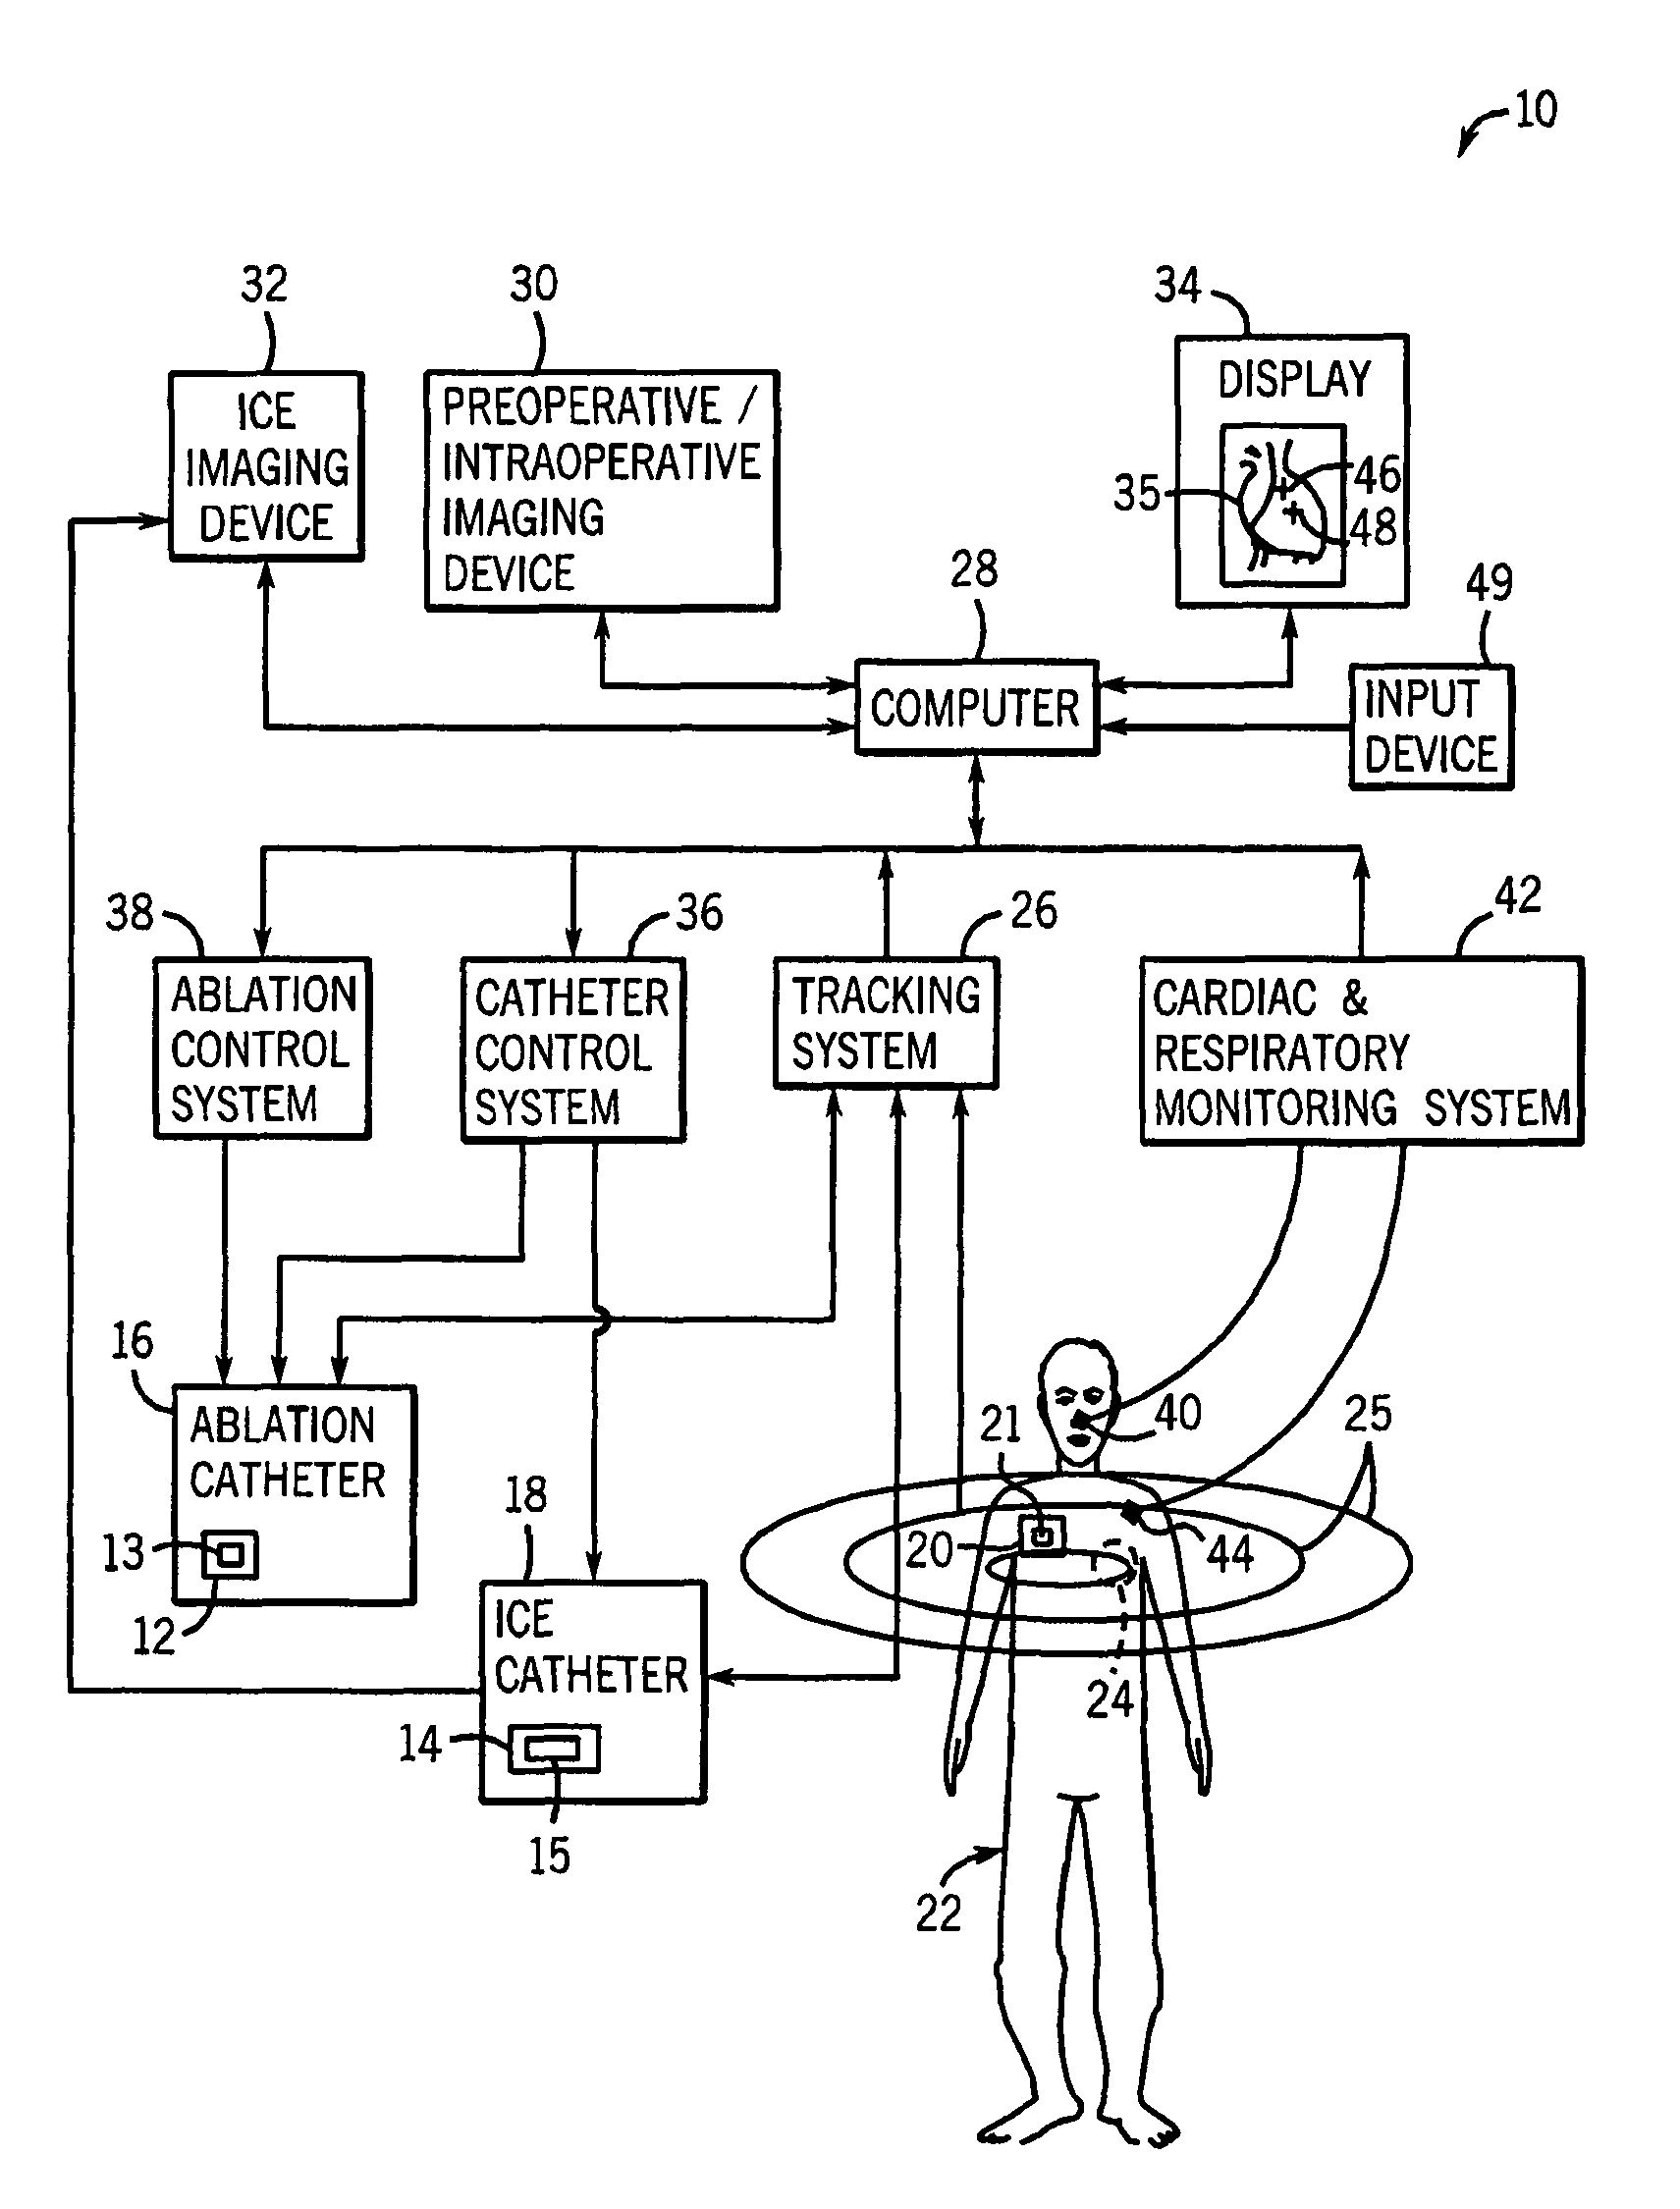 Navigation and imaging system sychronized with respiratory and/or cardiac activity